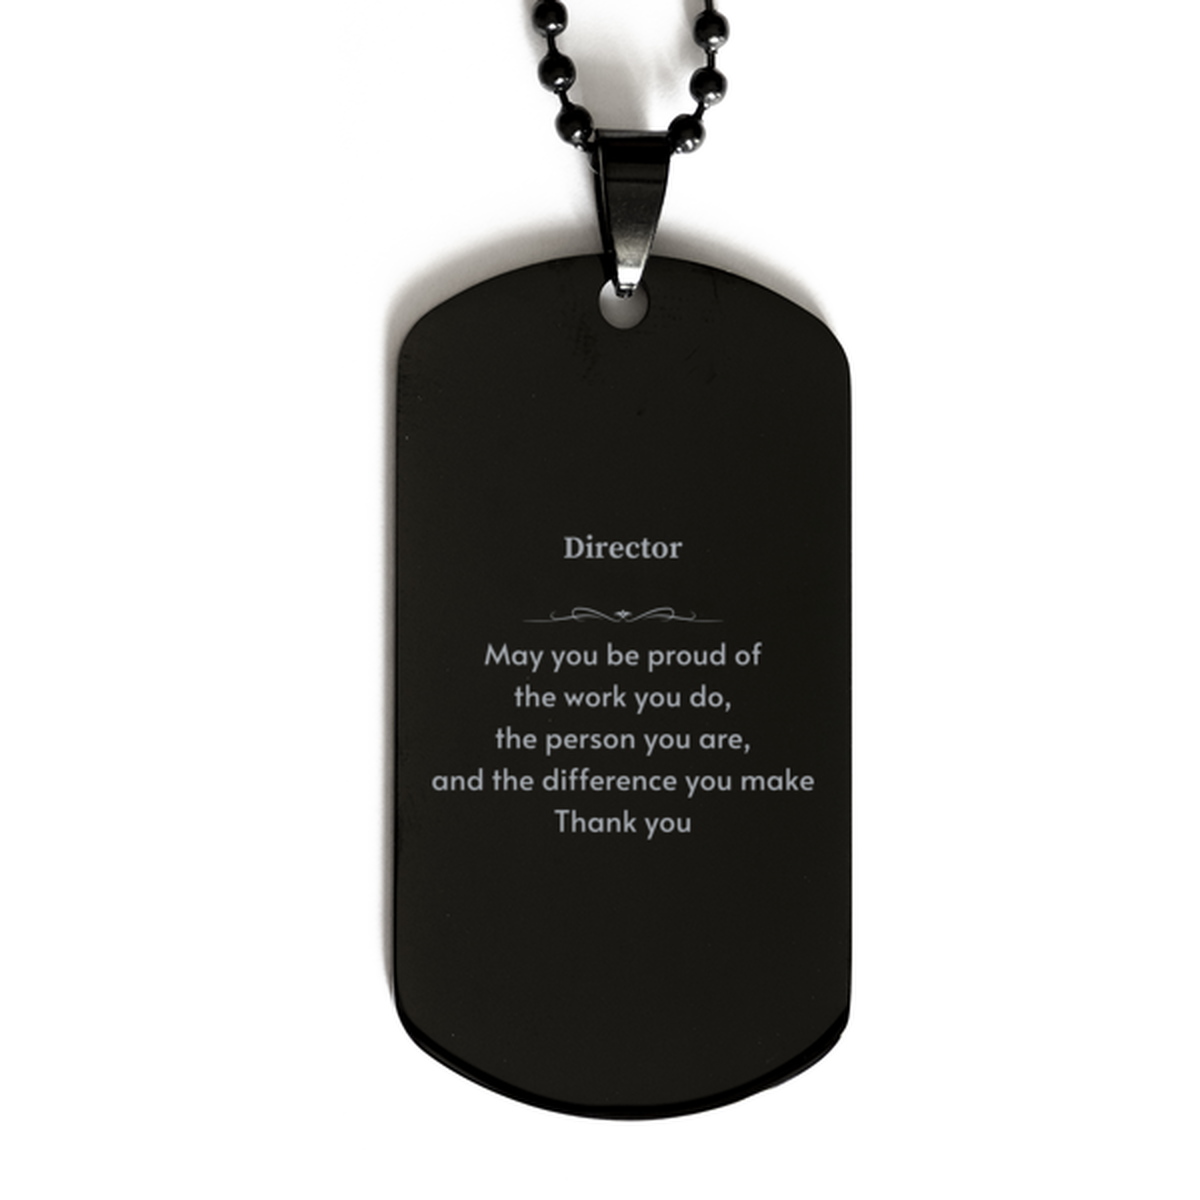 Heartwarming Black Dog Tag Retirement Coworkers Gifts for Director, Director May You be proud of the work you do, the person you are Gifts for Boss Men Women Friends